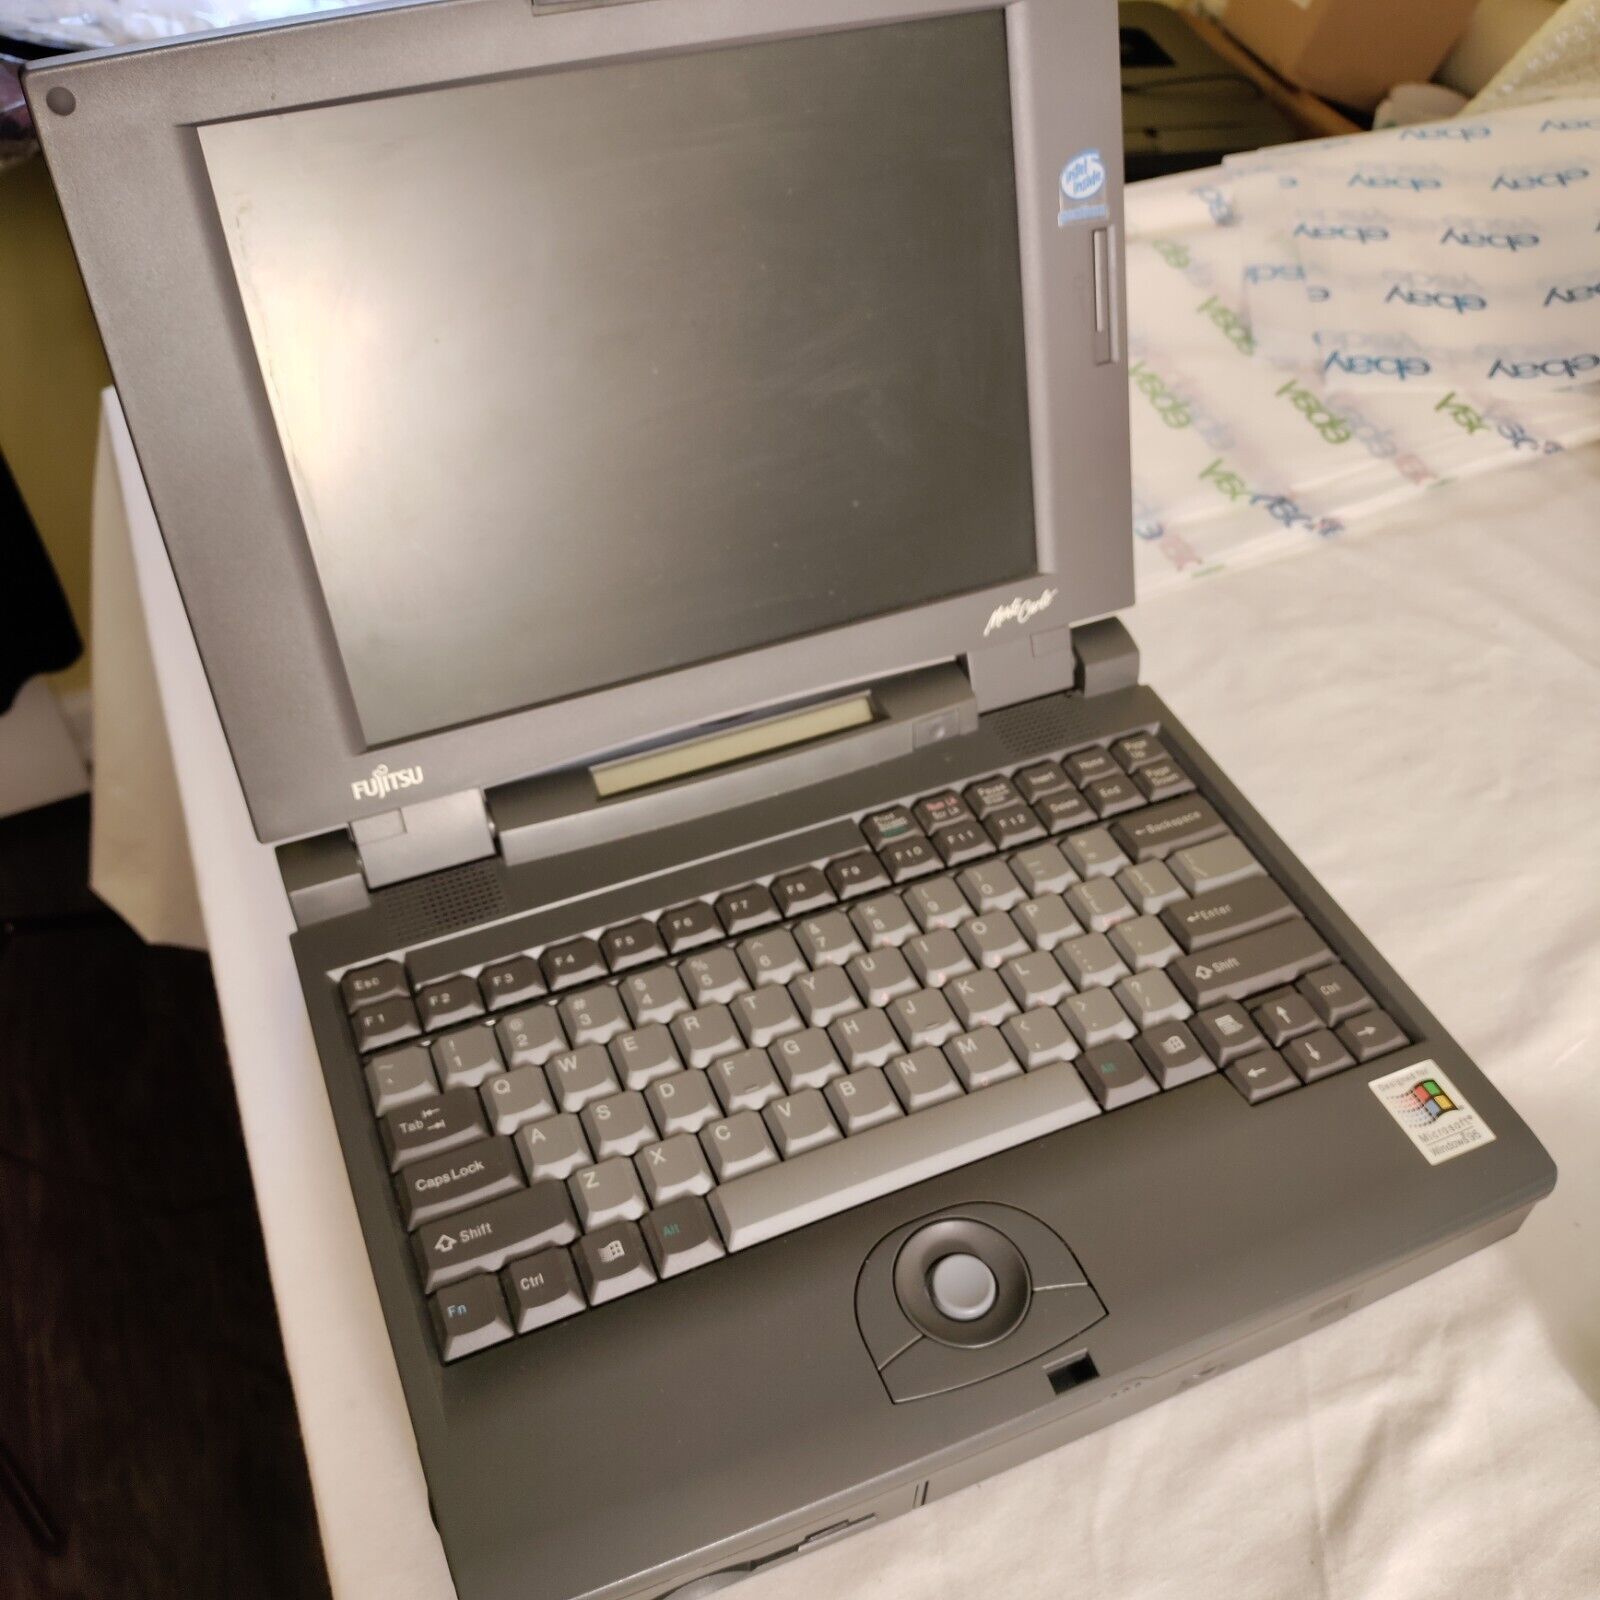 Fujitsu Monte Carlo Laptop For Parts (CD, Floppy, Bad Hard Drive ?) Powers On